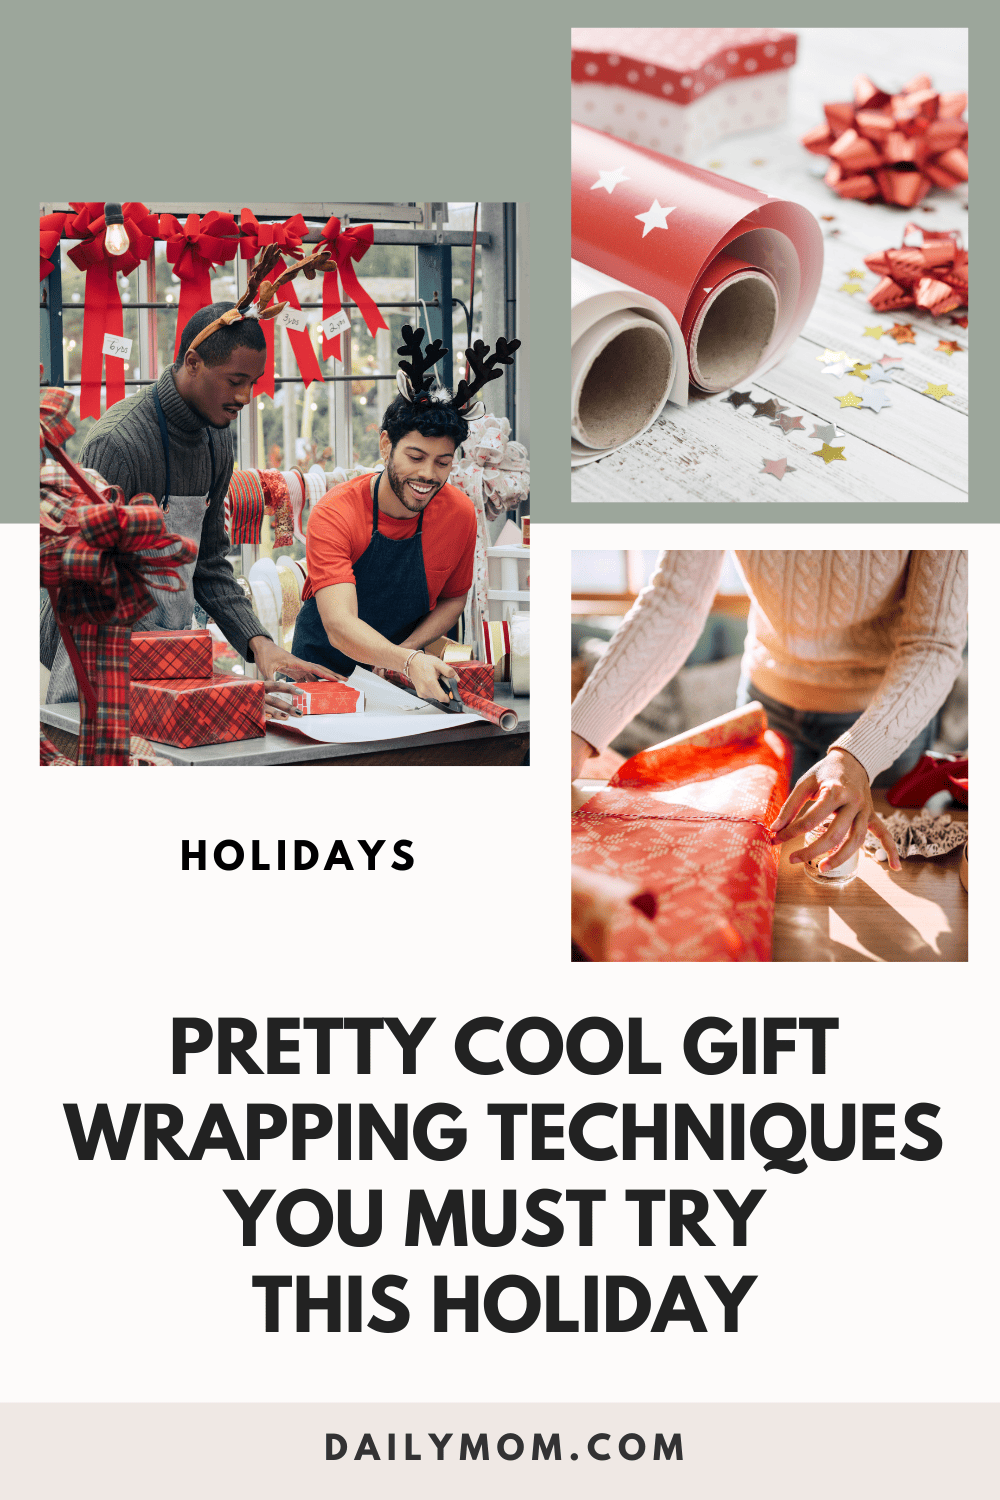 9 Unique Gift Wrapping Techniques To Try This Season 1 Daily Mom, Magazine For Families